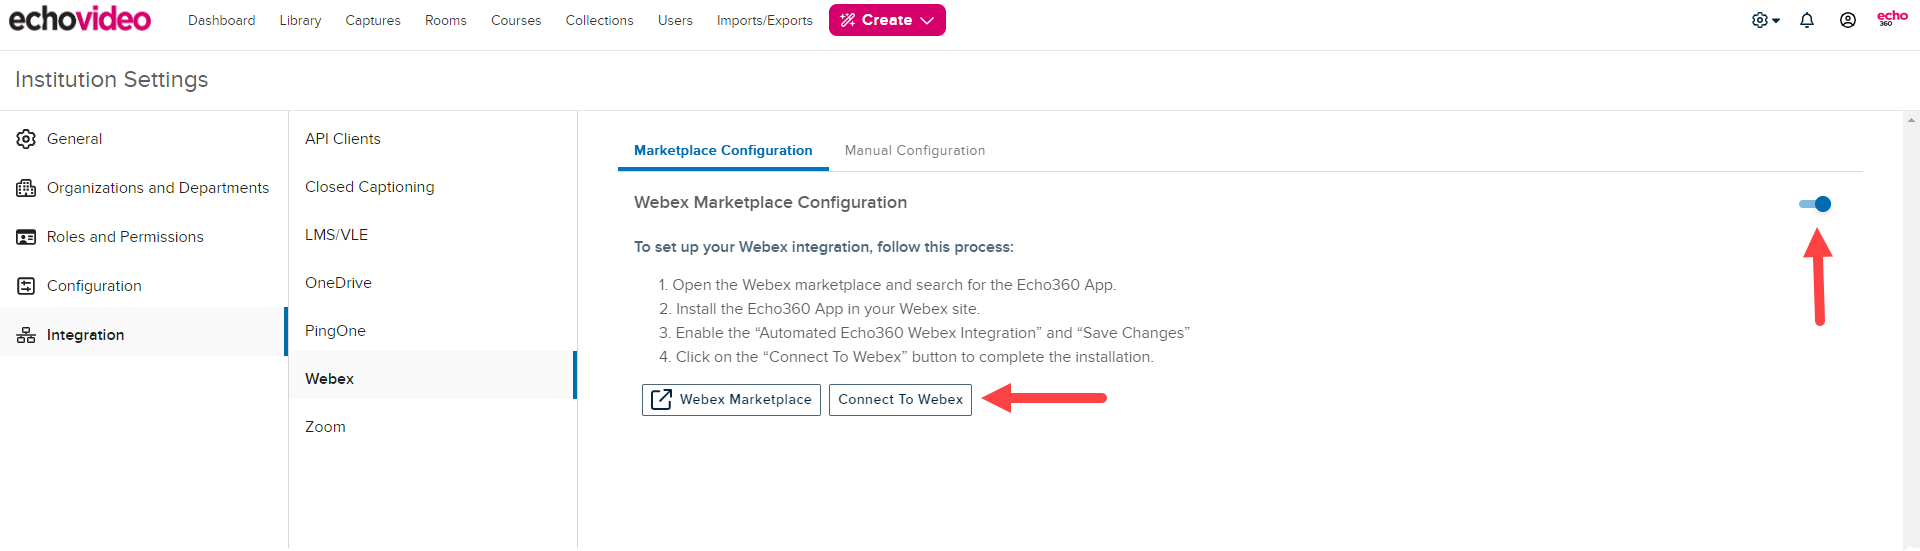 Webex Marketplace Configuration toggle enabled and Connect to Webex button identified as described